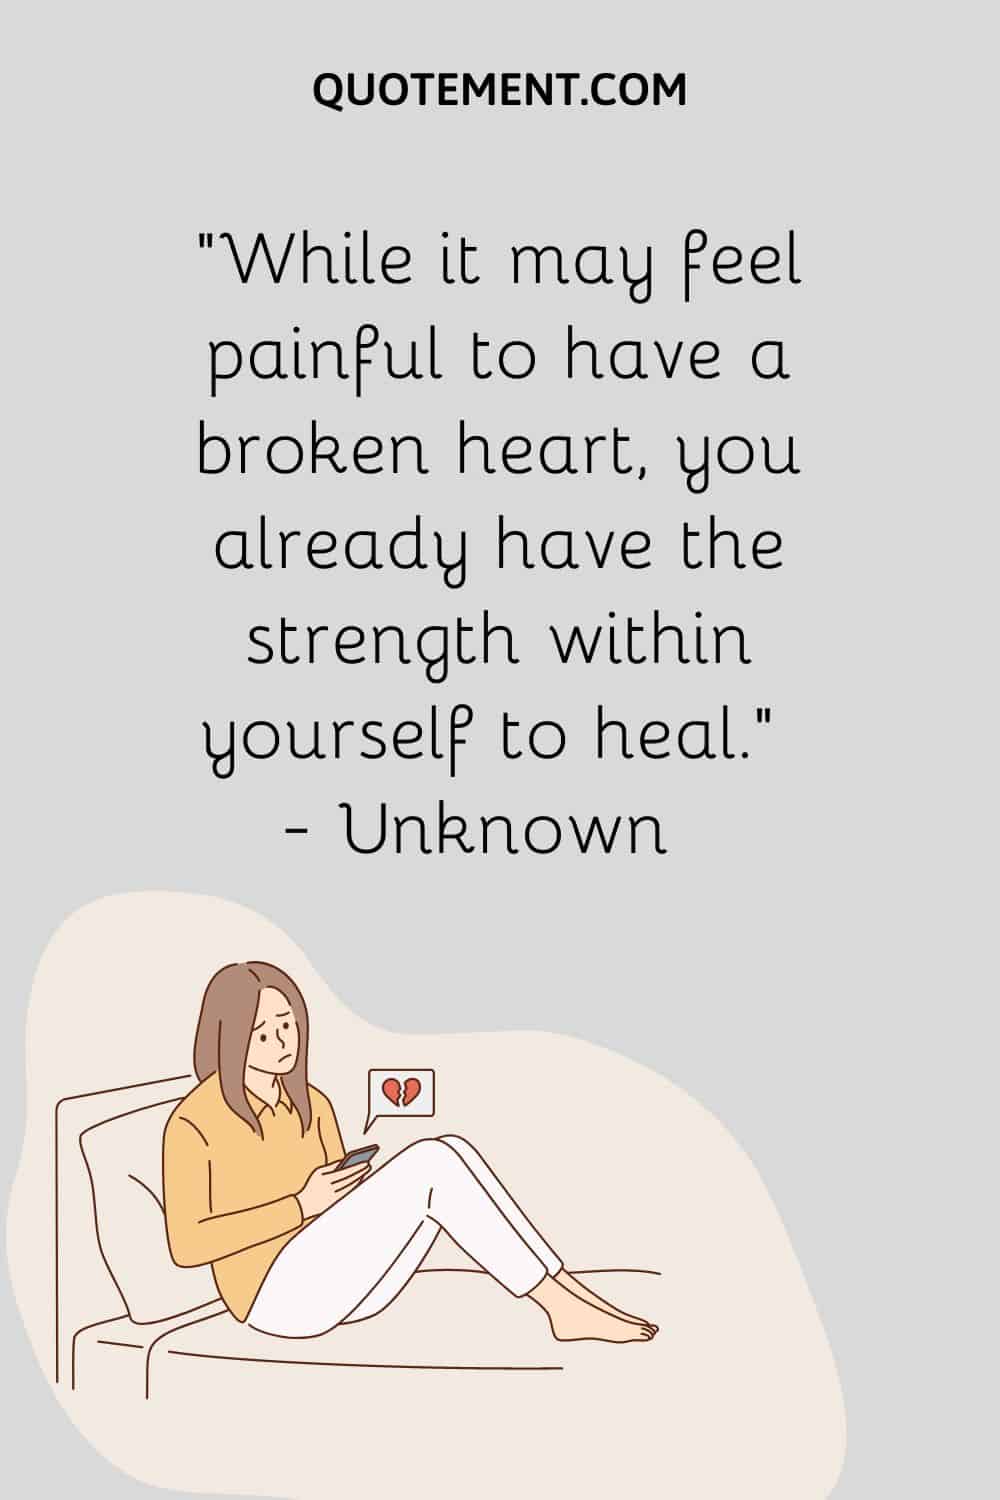 While it may feel painful to have a broken heart, you already have the strength within yourself to heal